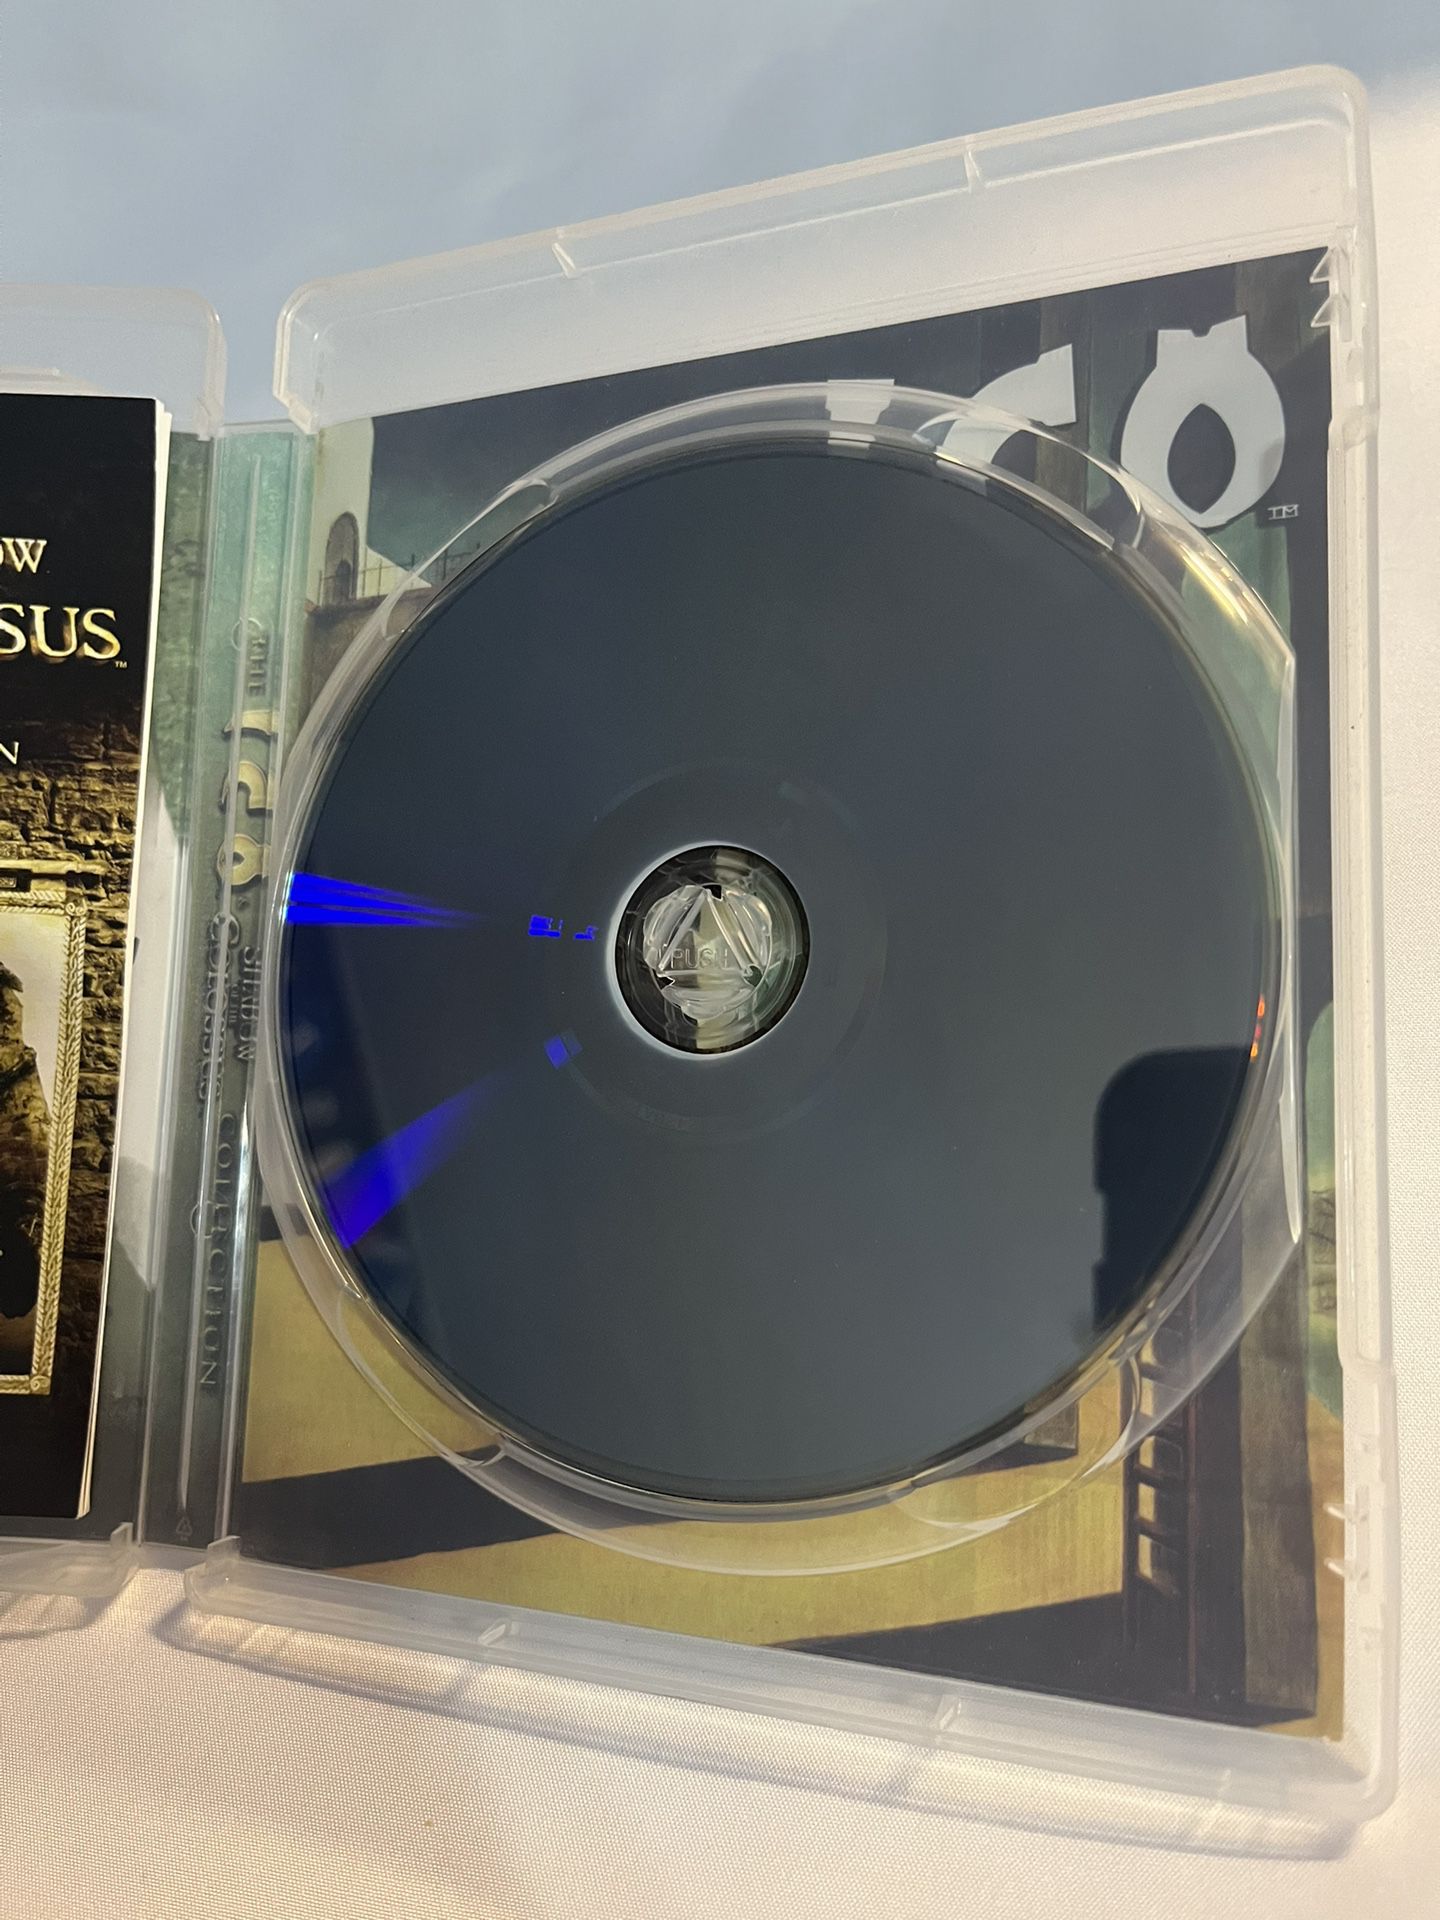 THE ICO & SHADOW OF COLOSSUS COLLECTION - Sony Playstation 3 Game, PS3 for  Sale in Virginia Beach, VA - OfferUp